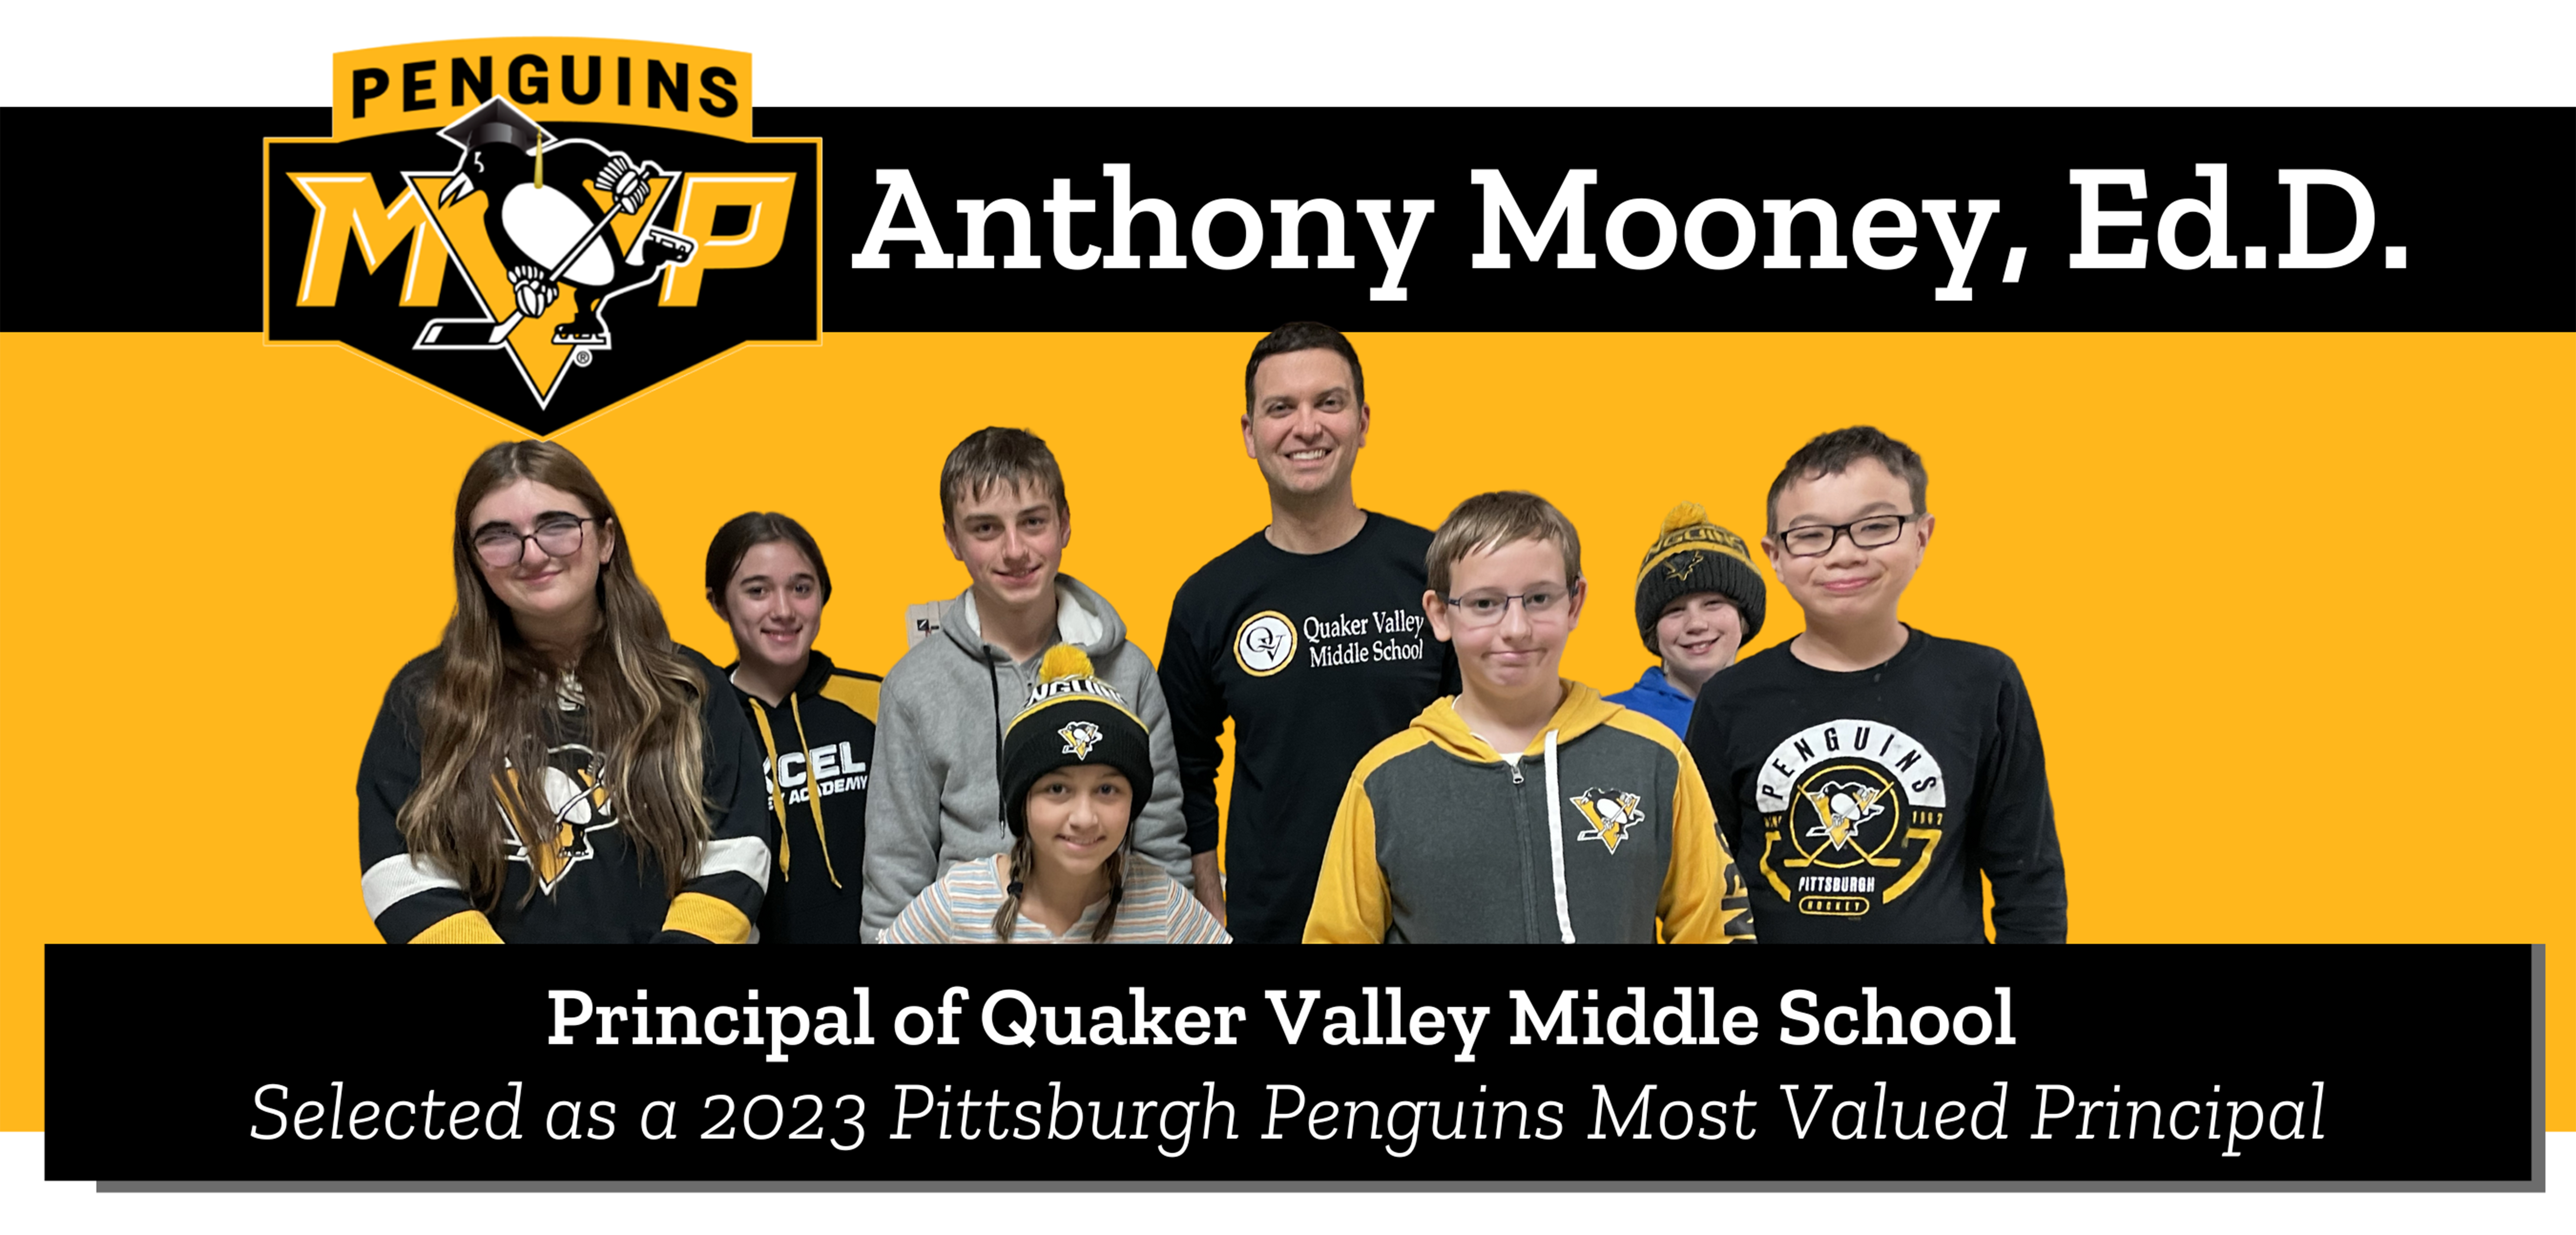 Penguins MVP Anthony Mooney, Ed.D.; Principal of Quaker Valley Middle School; Selected as a 2023 Pittsburgh Pens MVP